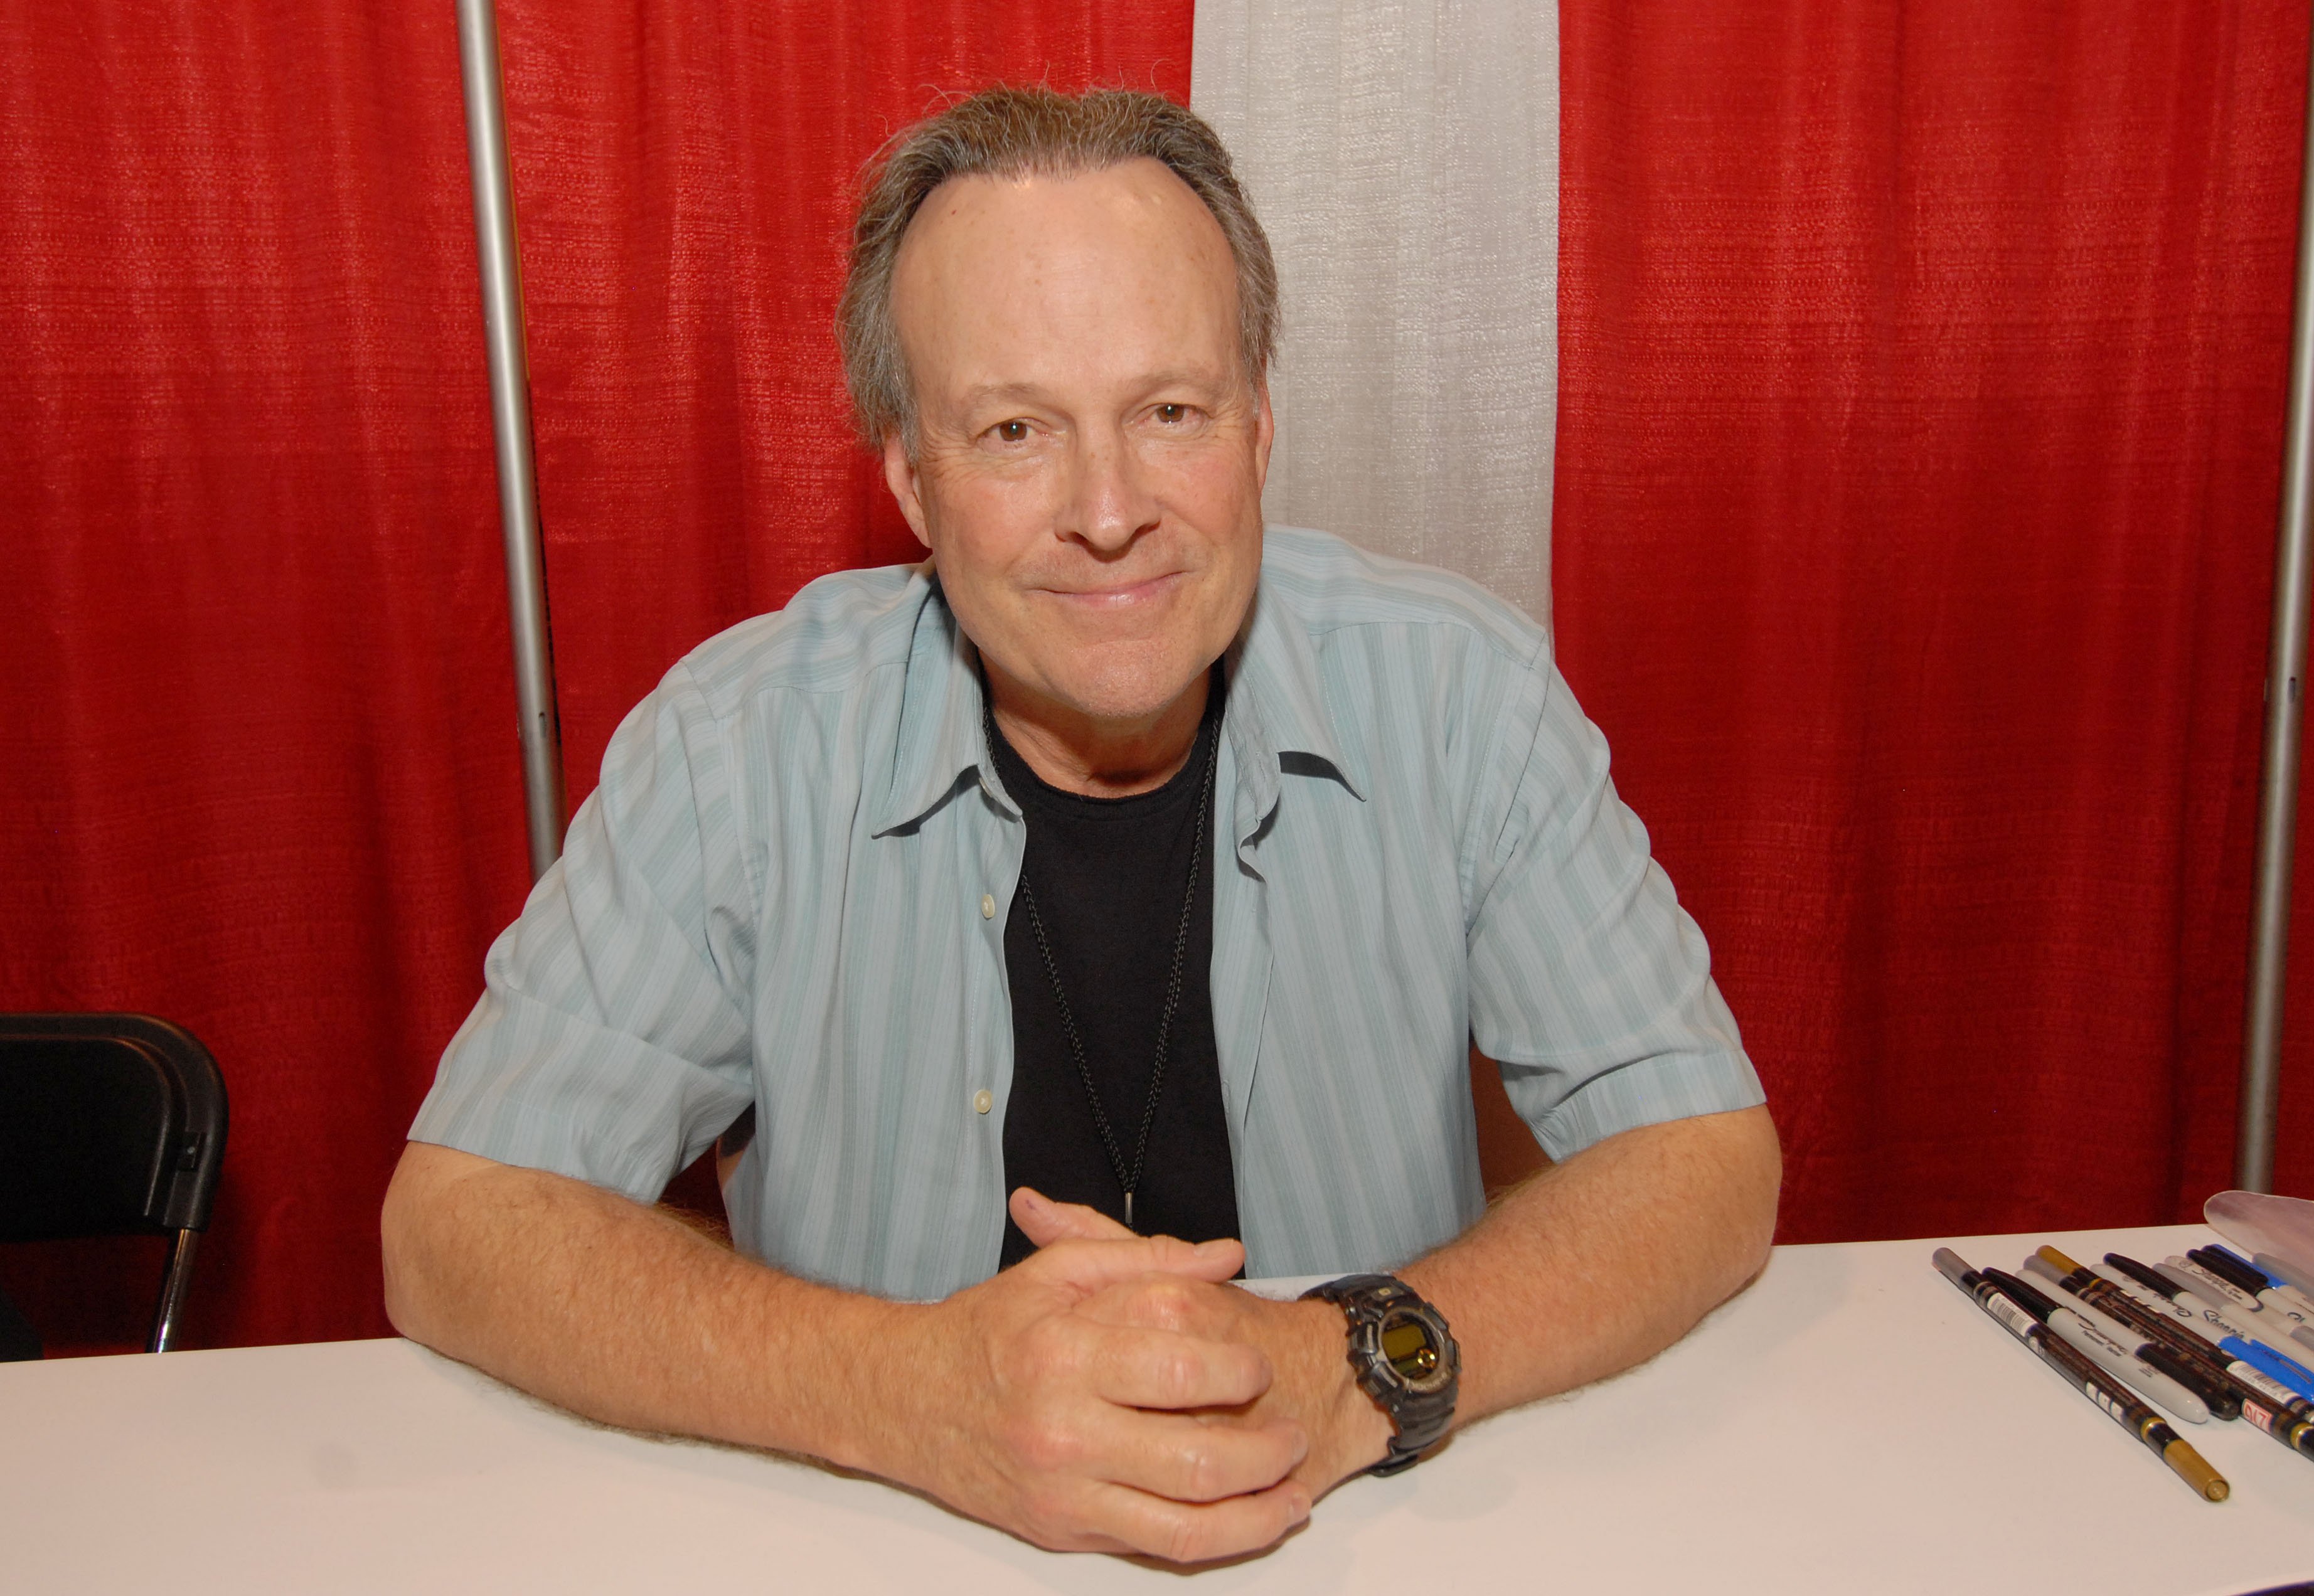 Dwight Schultz attends the first day of Motor City Comic Con 2012 at the Suburban Collection Showplace on May 18, 2012 in Novi, Michigan. | Photo: Getty Images